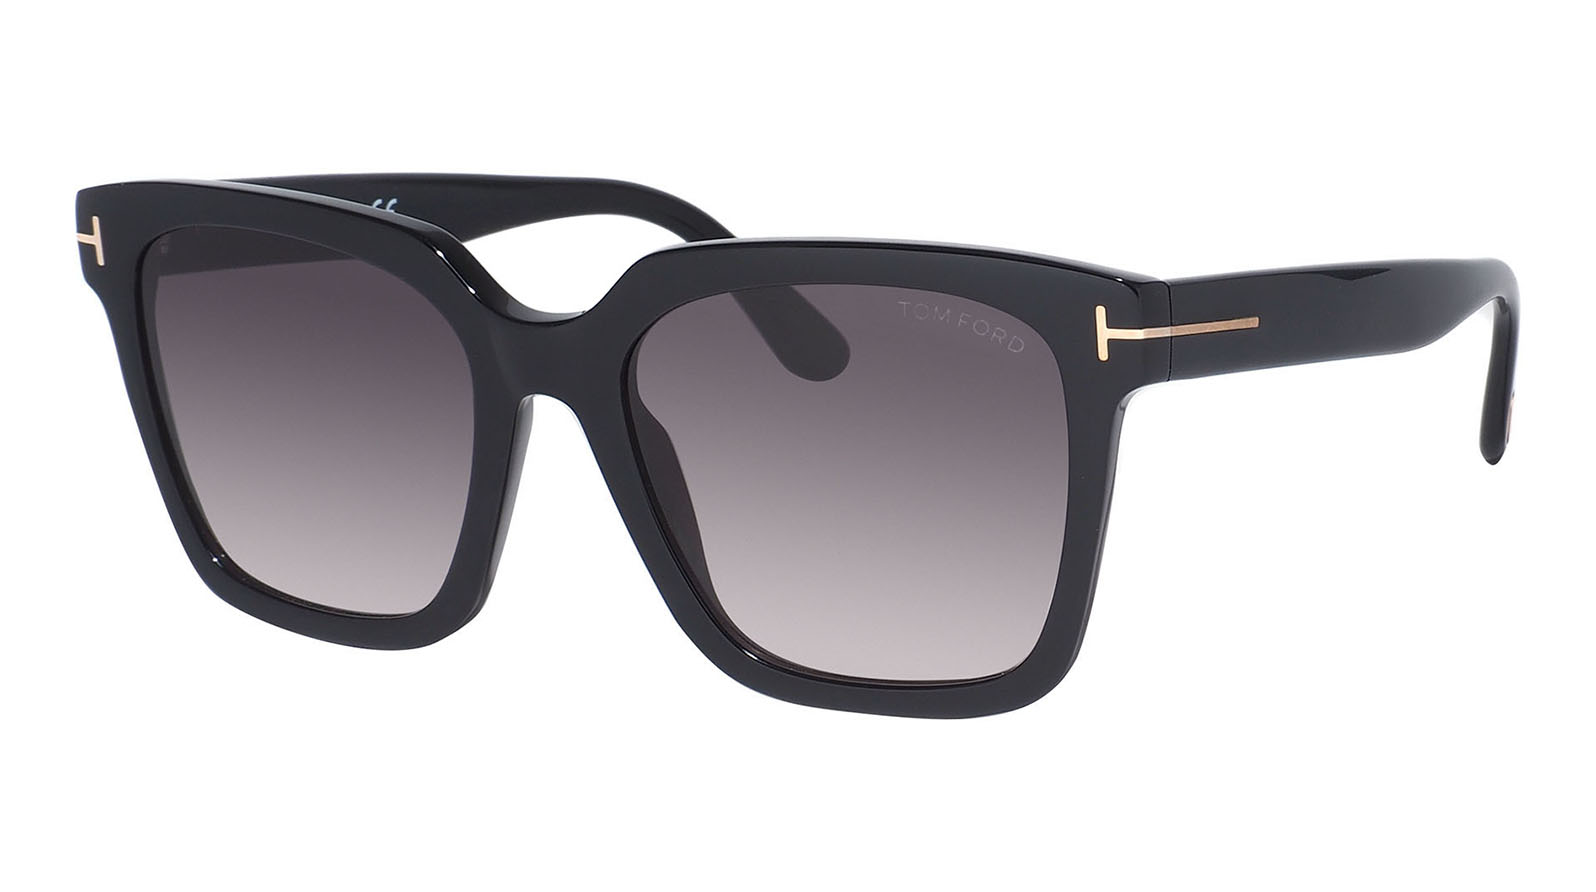 Tom Ford Selby 952 01B